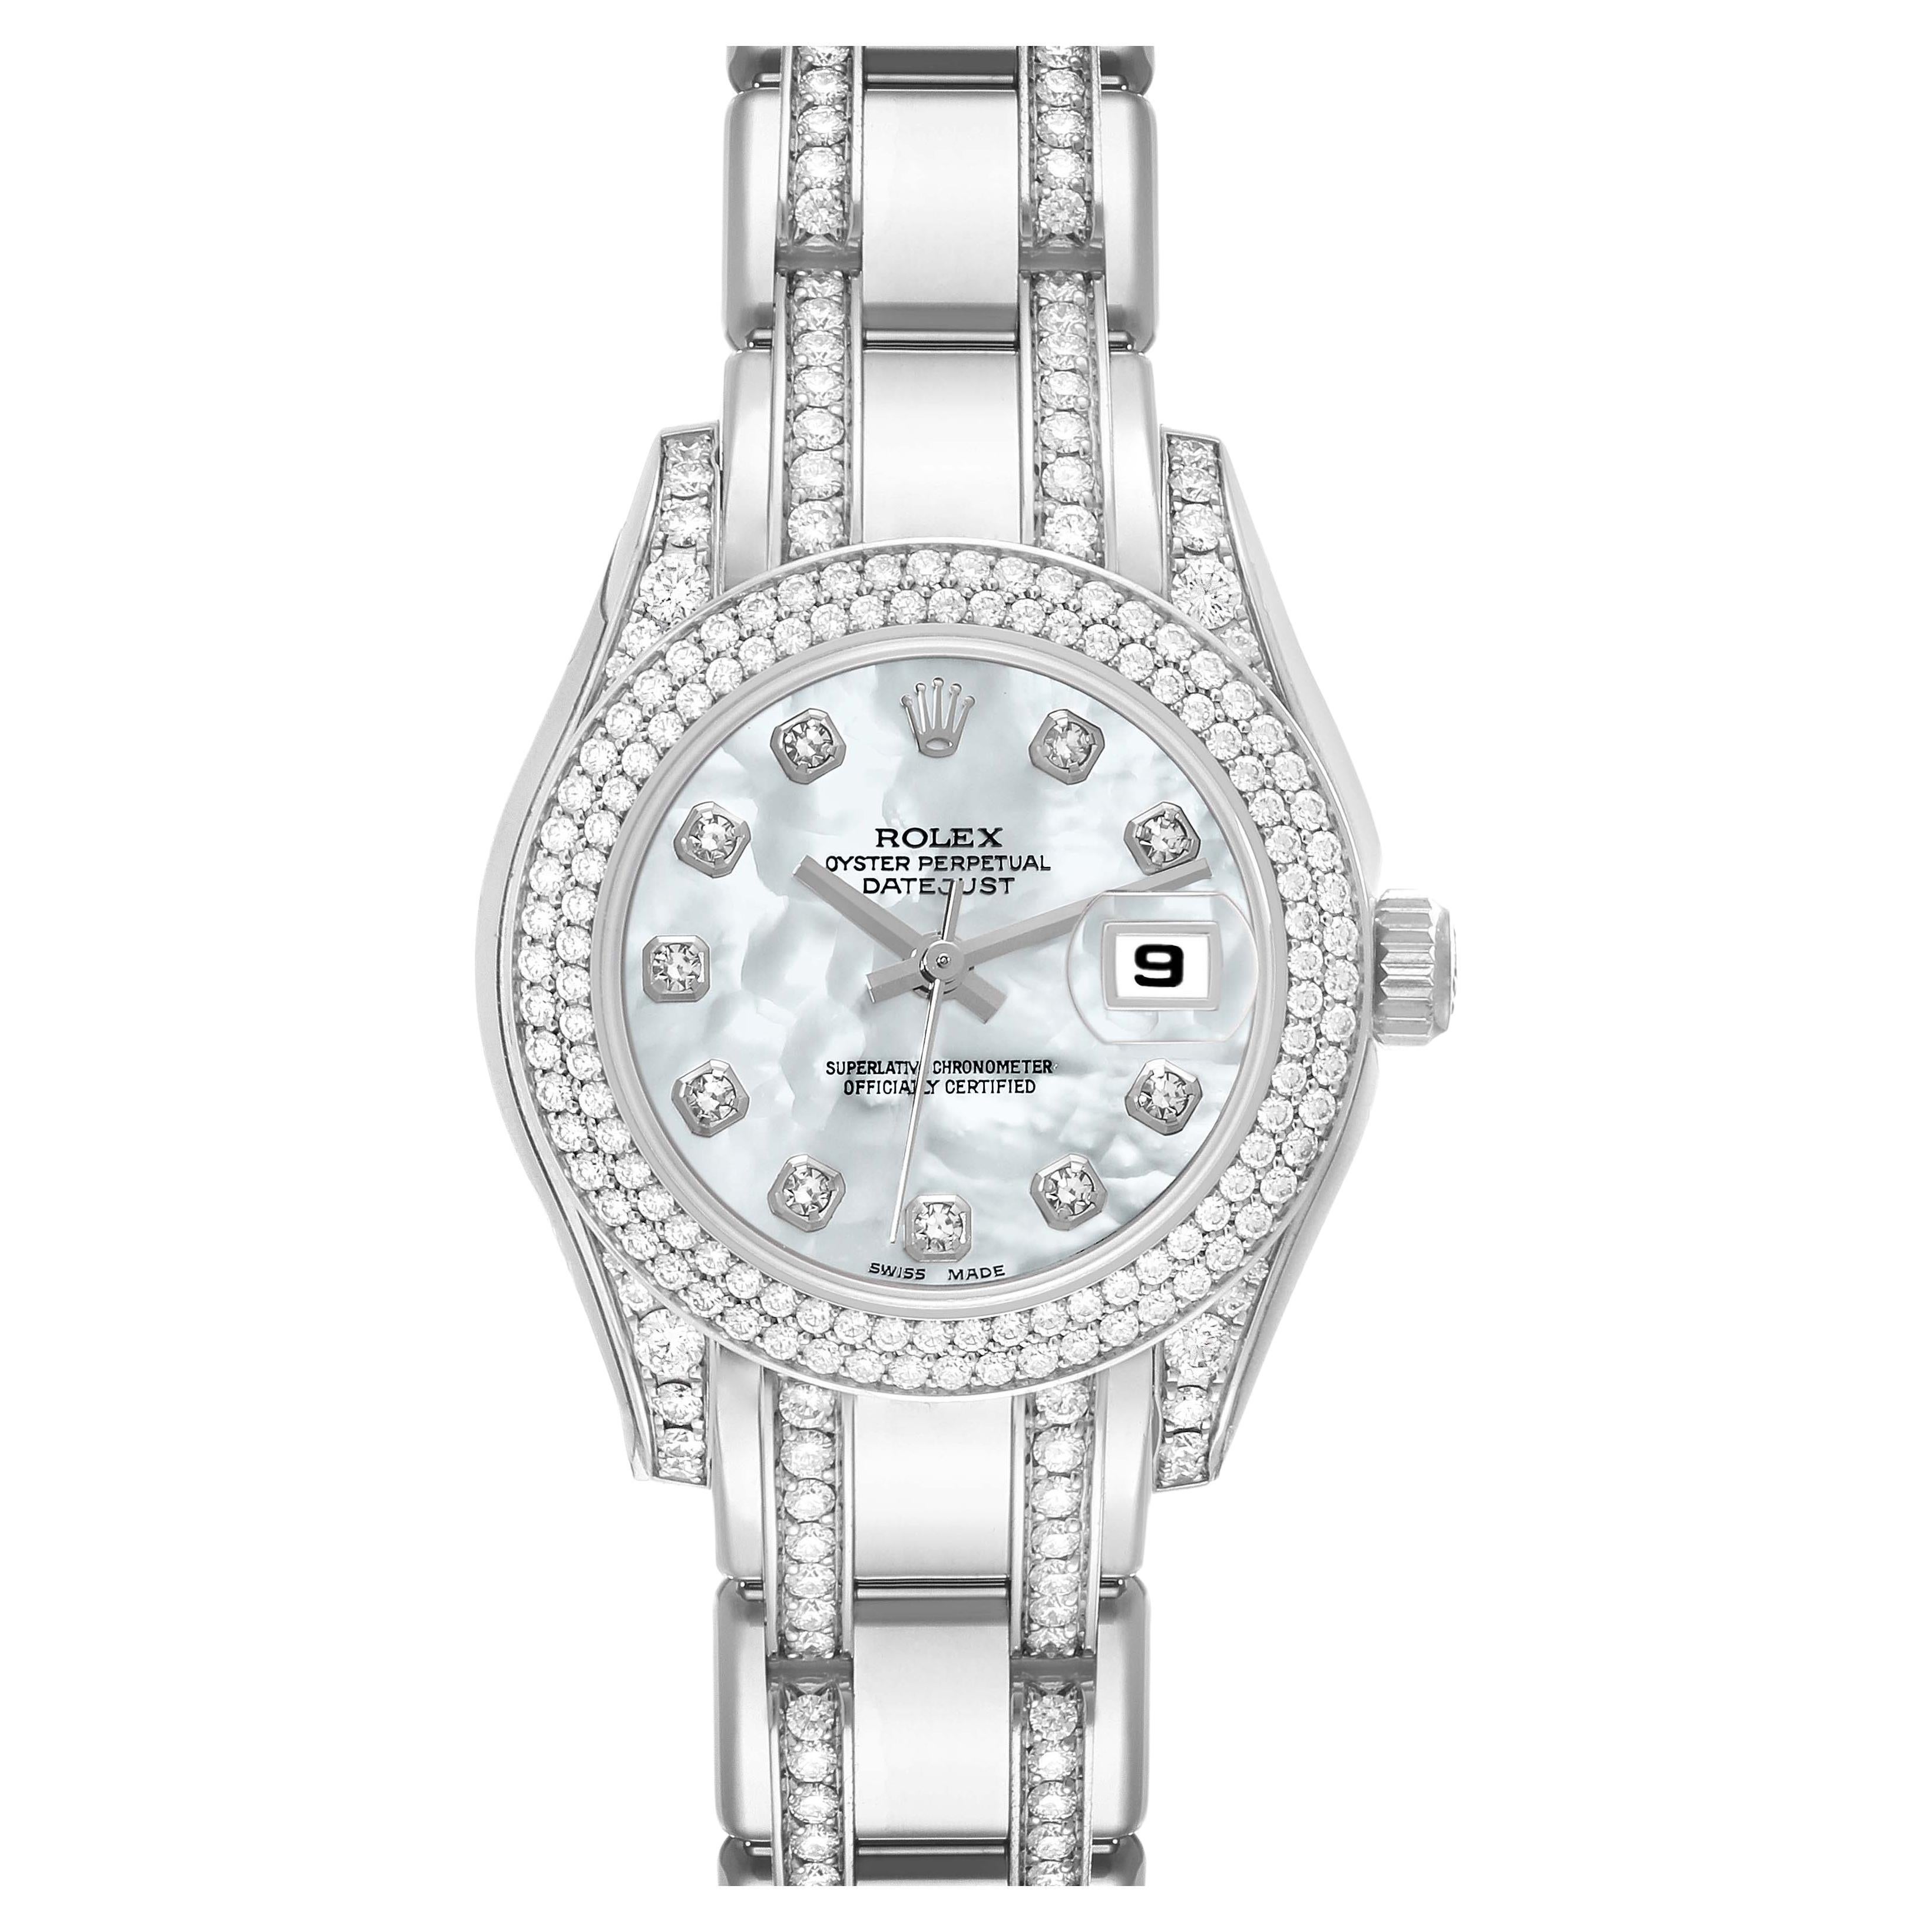 Rolex Pearlmaster White Gold Mother of Pearl Diamond Ladies Watch 